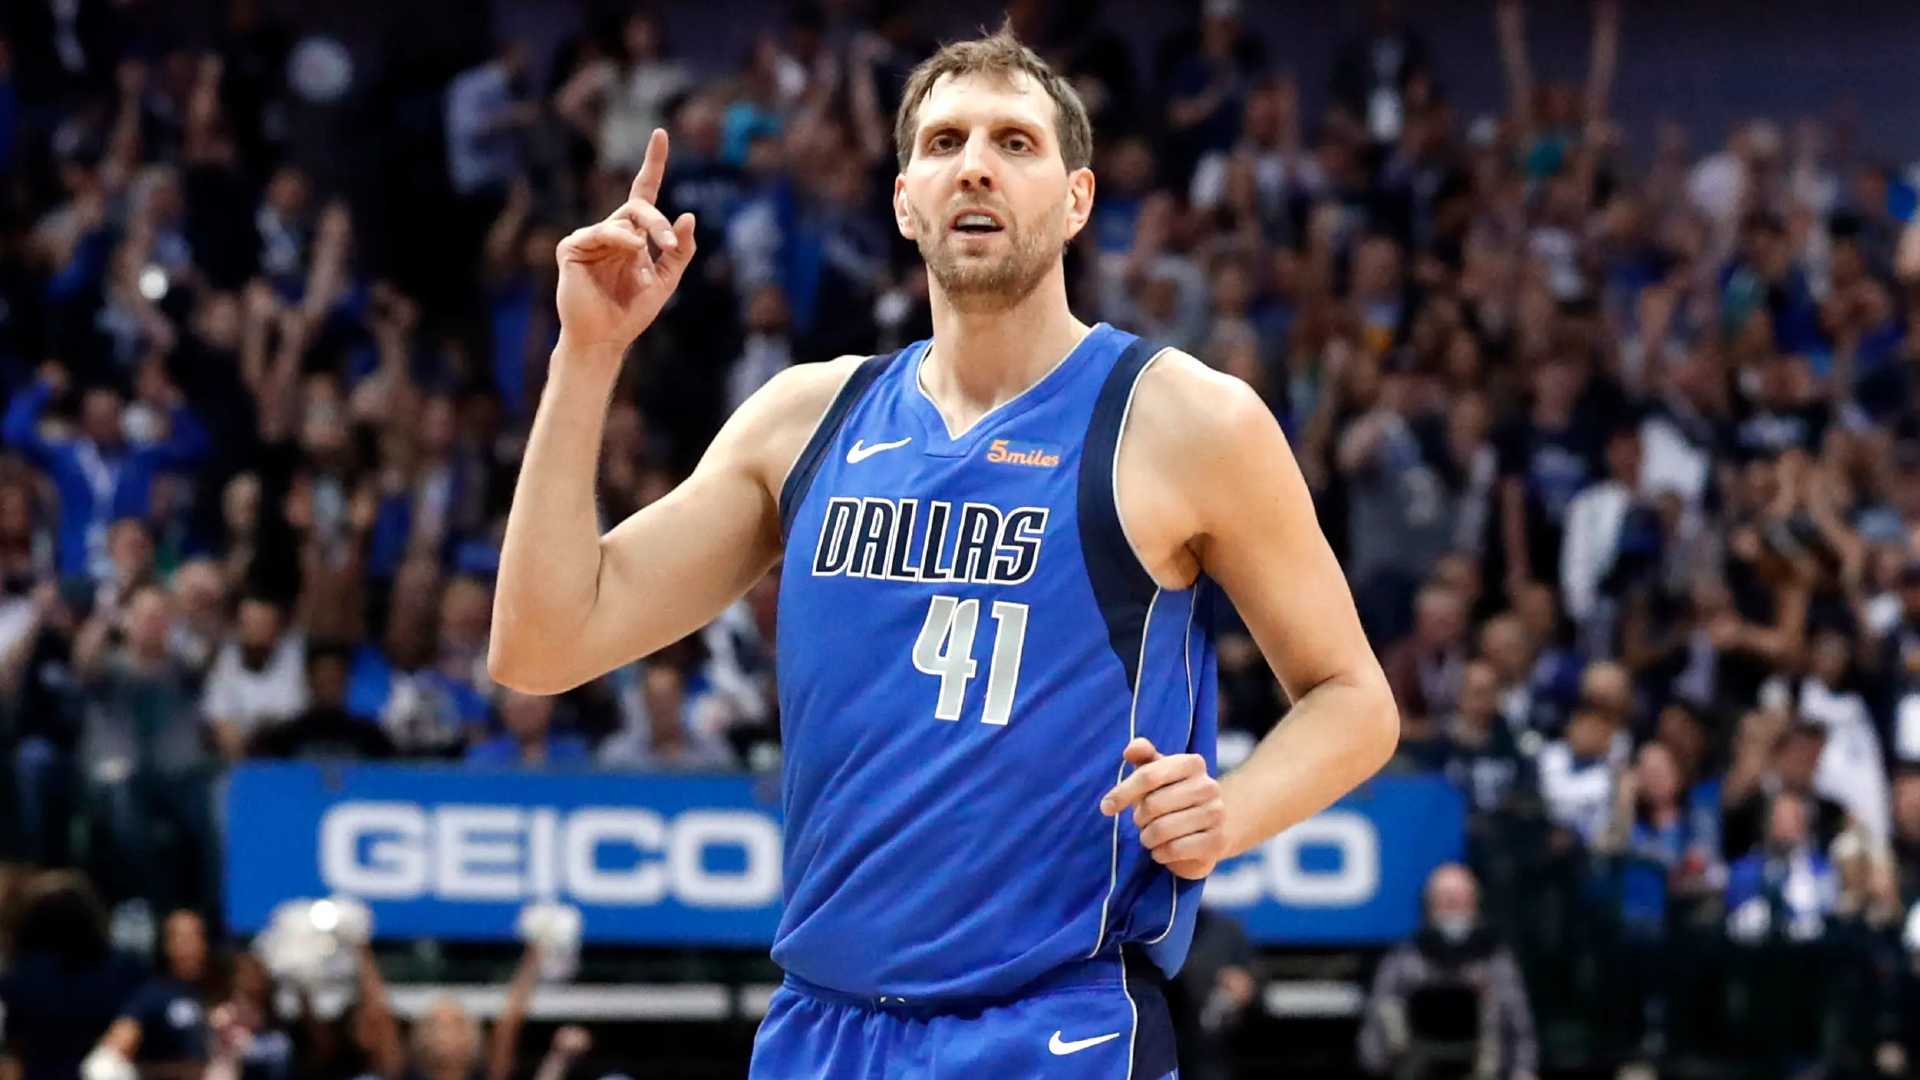 Dirk Nowitzki in a file photo. (Image credits: twitter)